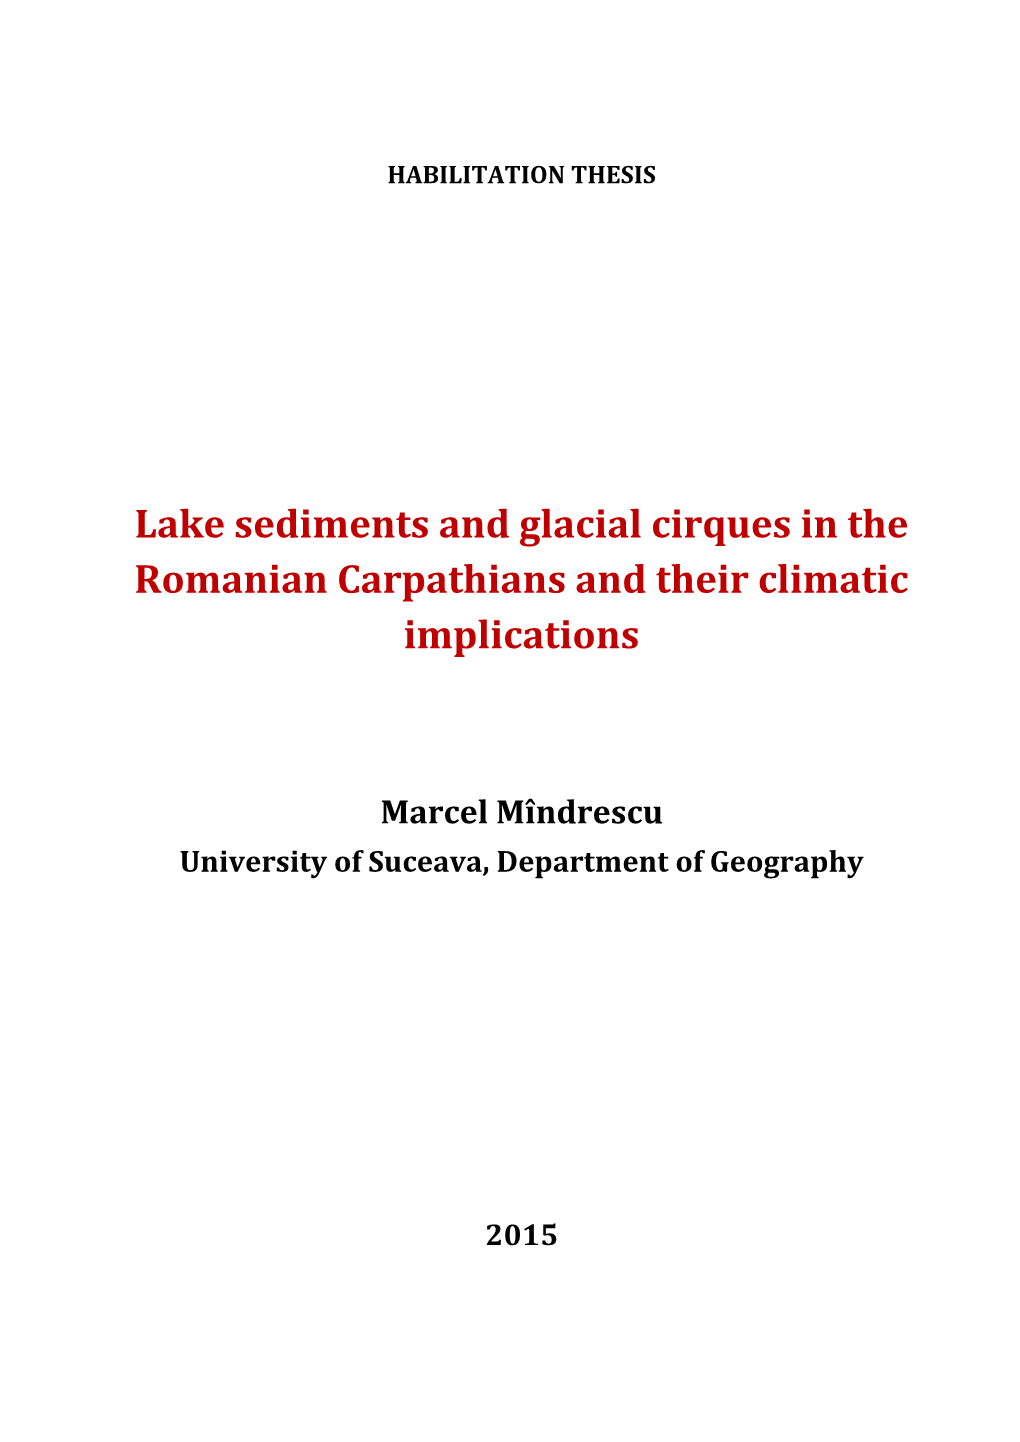 Lake Sediments and Glacial Cirques in the Romanian Carpathians and Their Climatic Implications